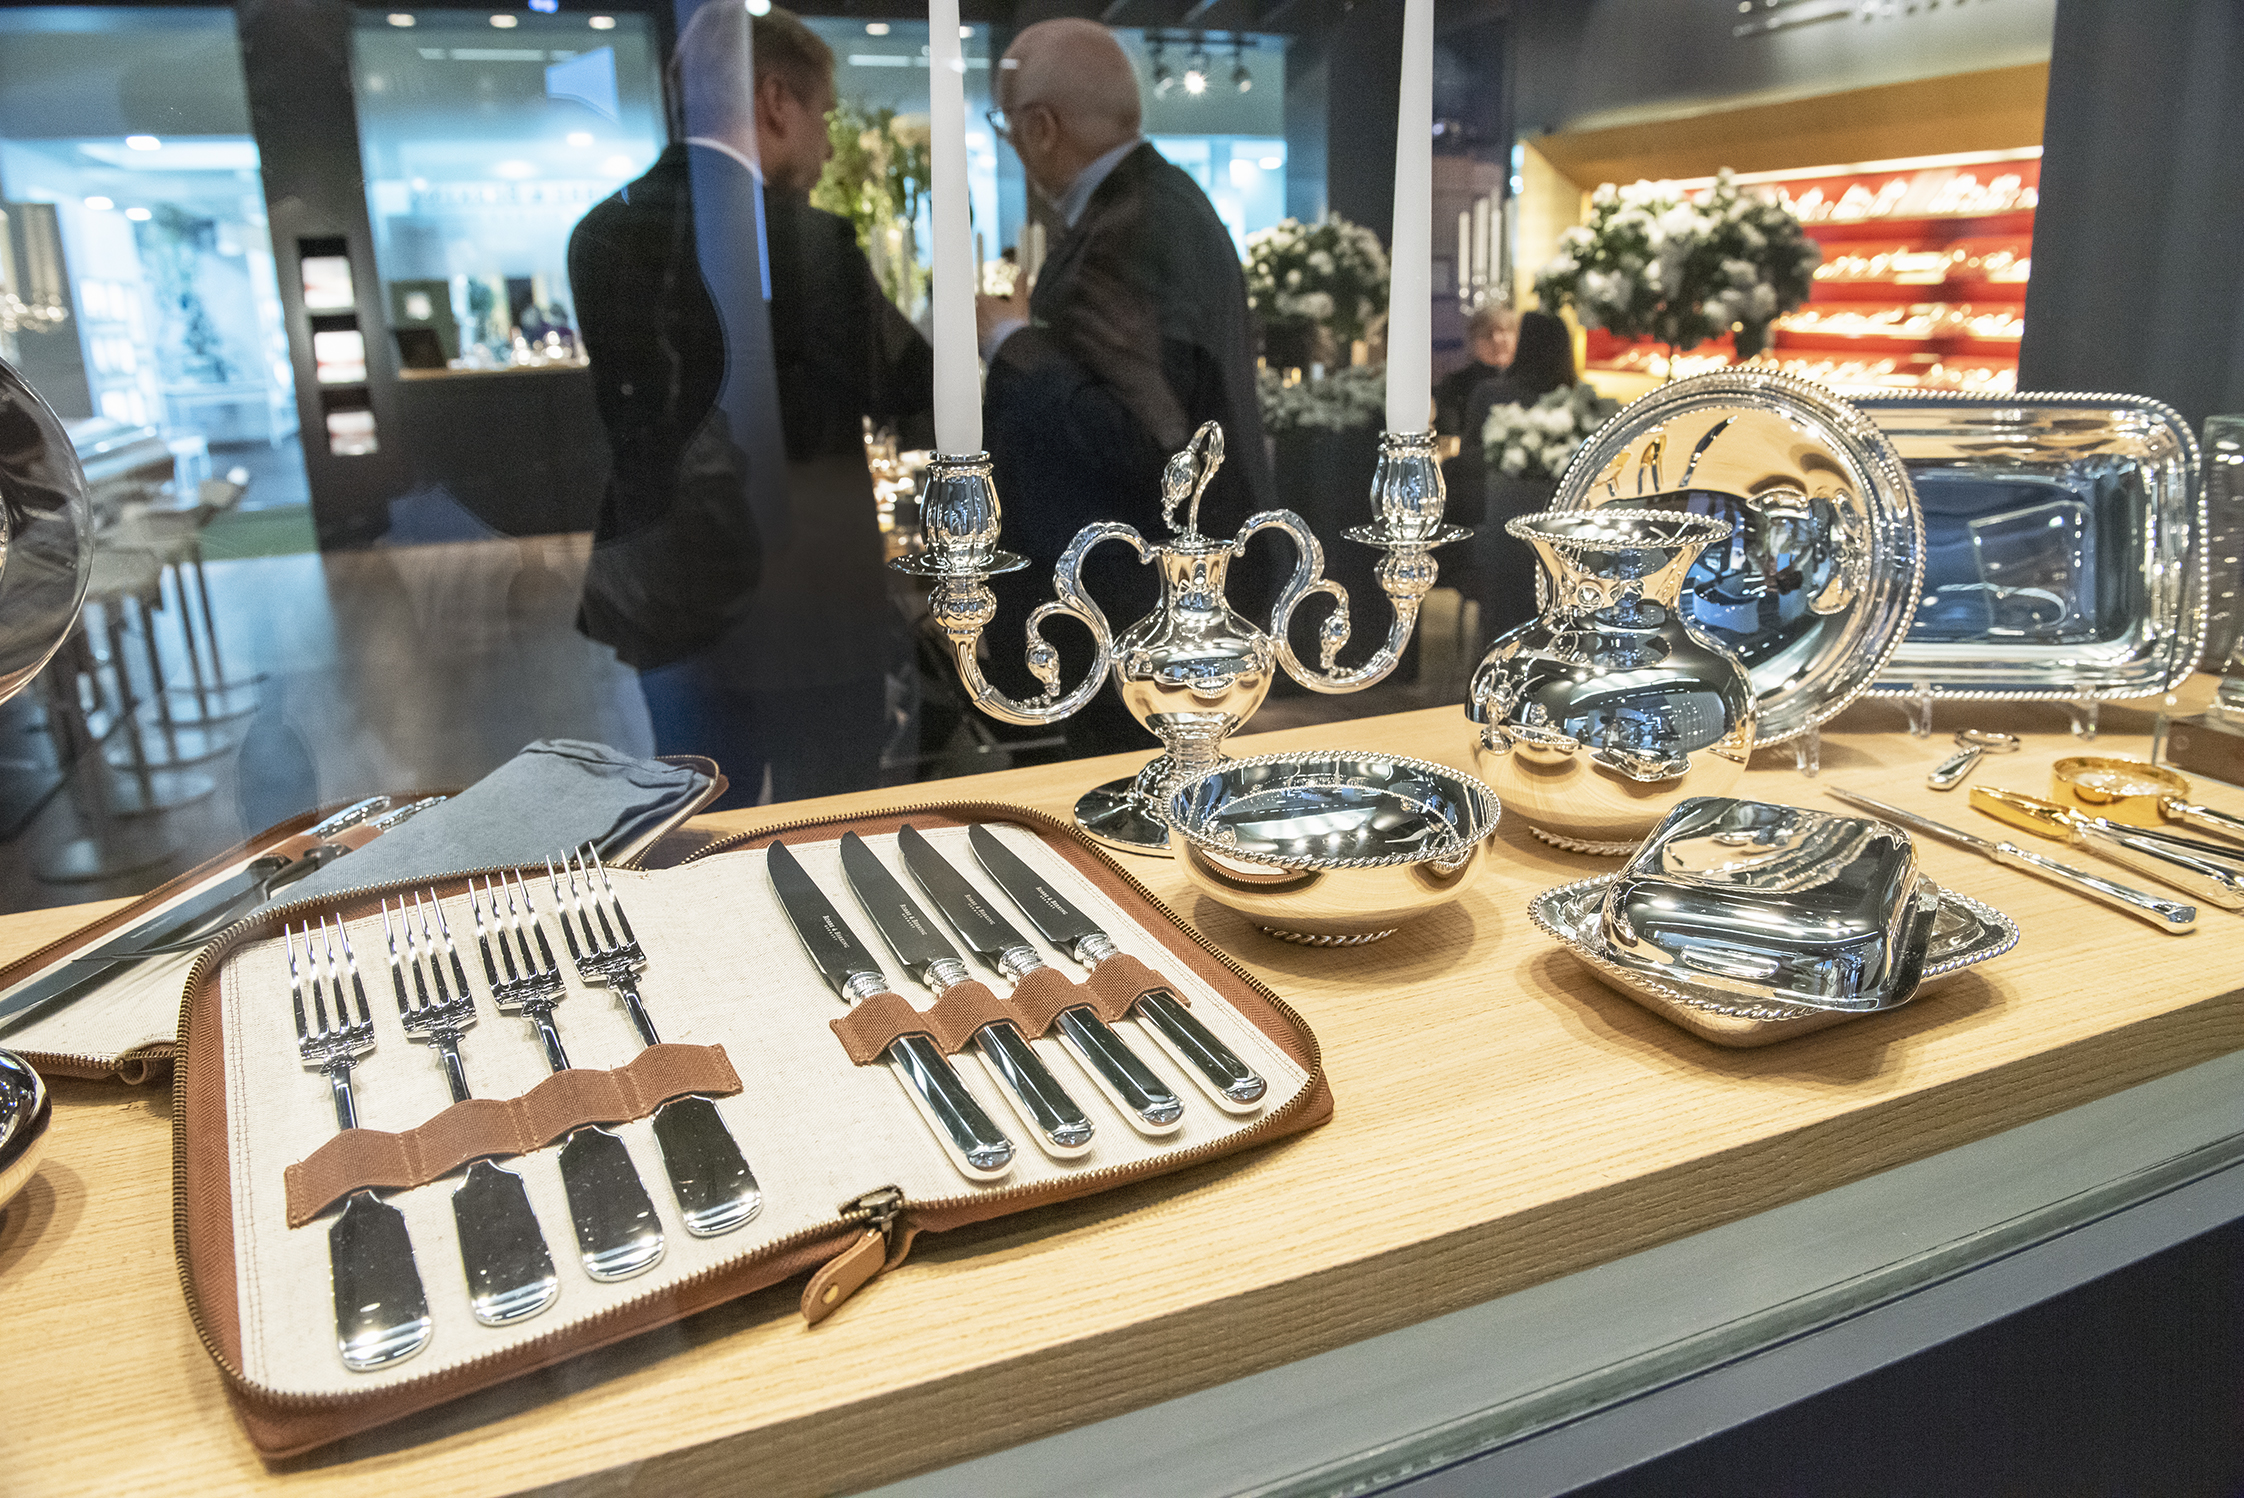 Robbe & Berking shows at Ambiente 2023 high quality silverwear, which immediately catches the eye of every viewer